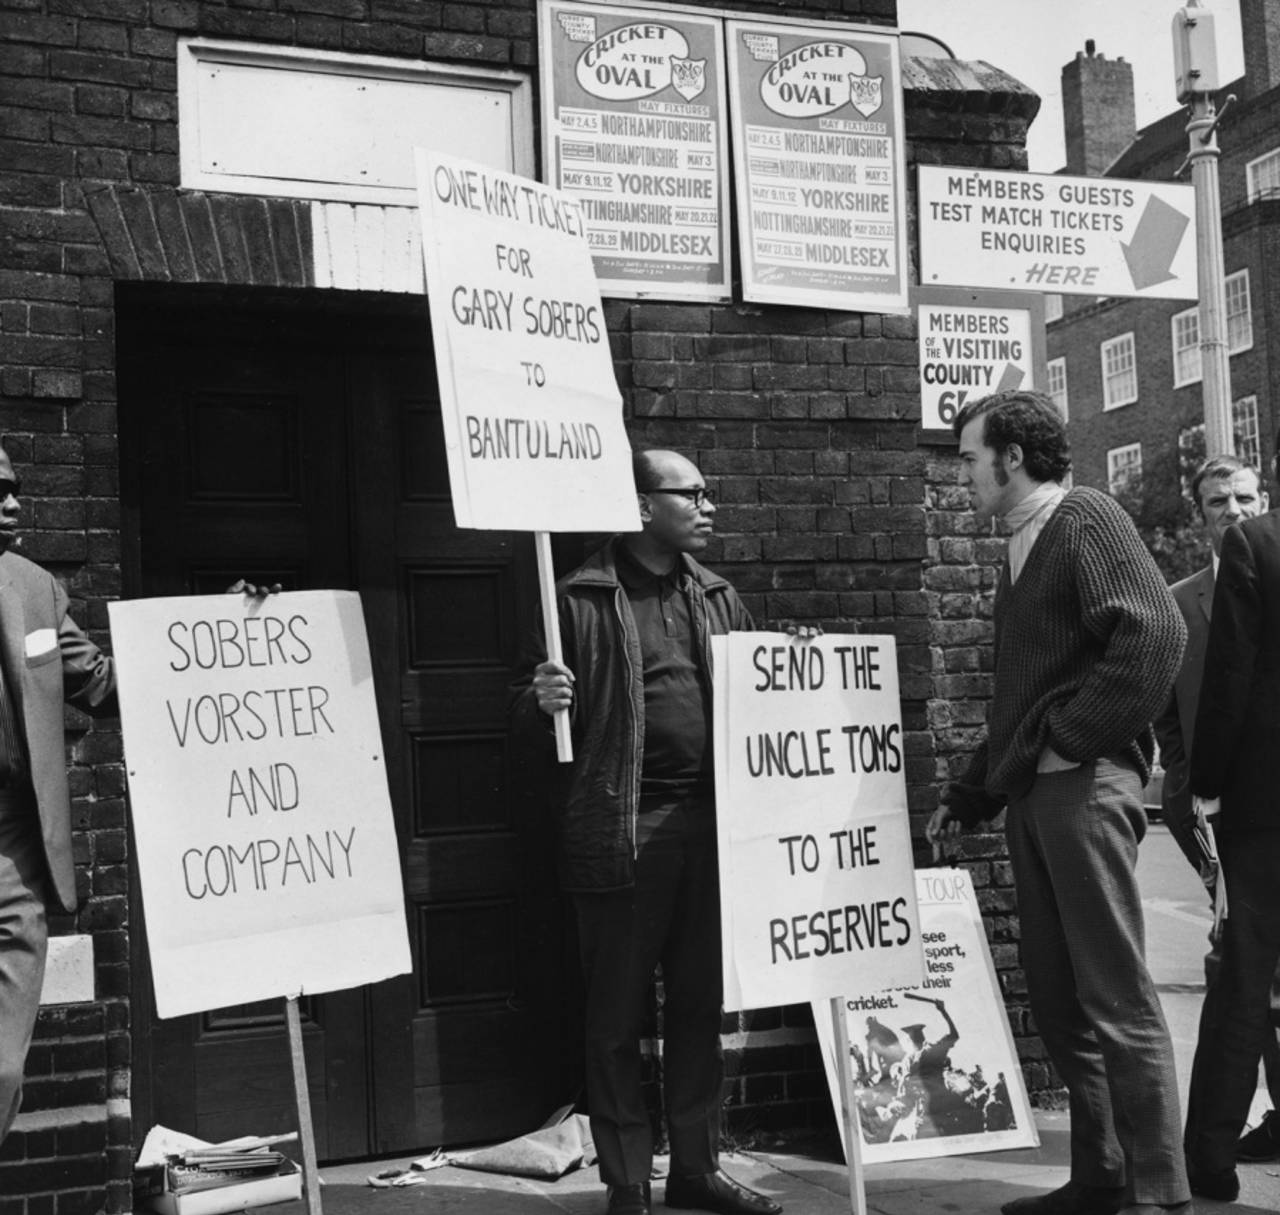 Peter Hain, leader of the Stop the Seventy Tour, talks to a demonstrator outside The Oval, May 20, 1970